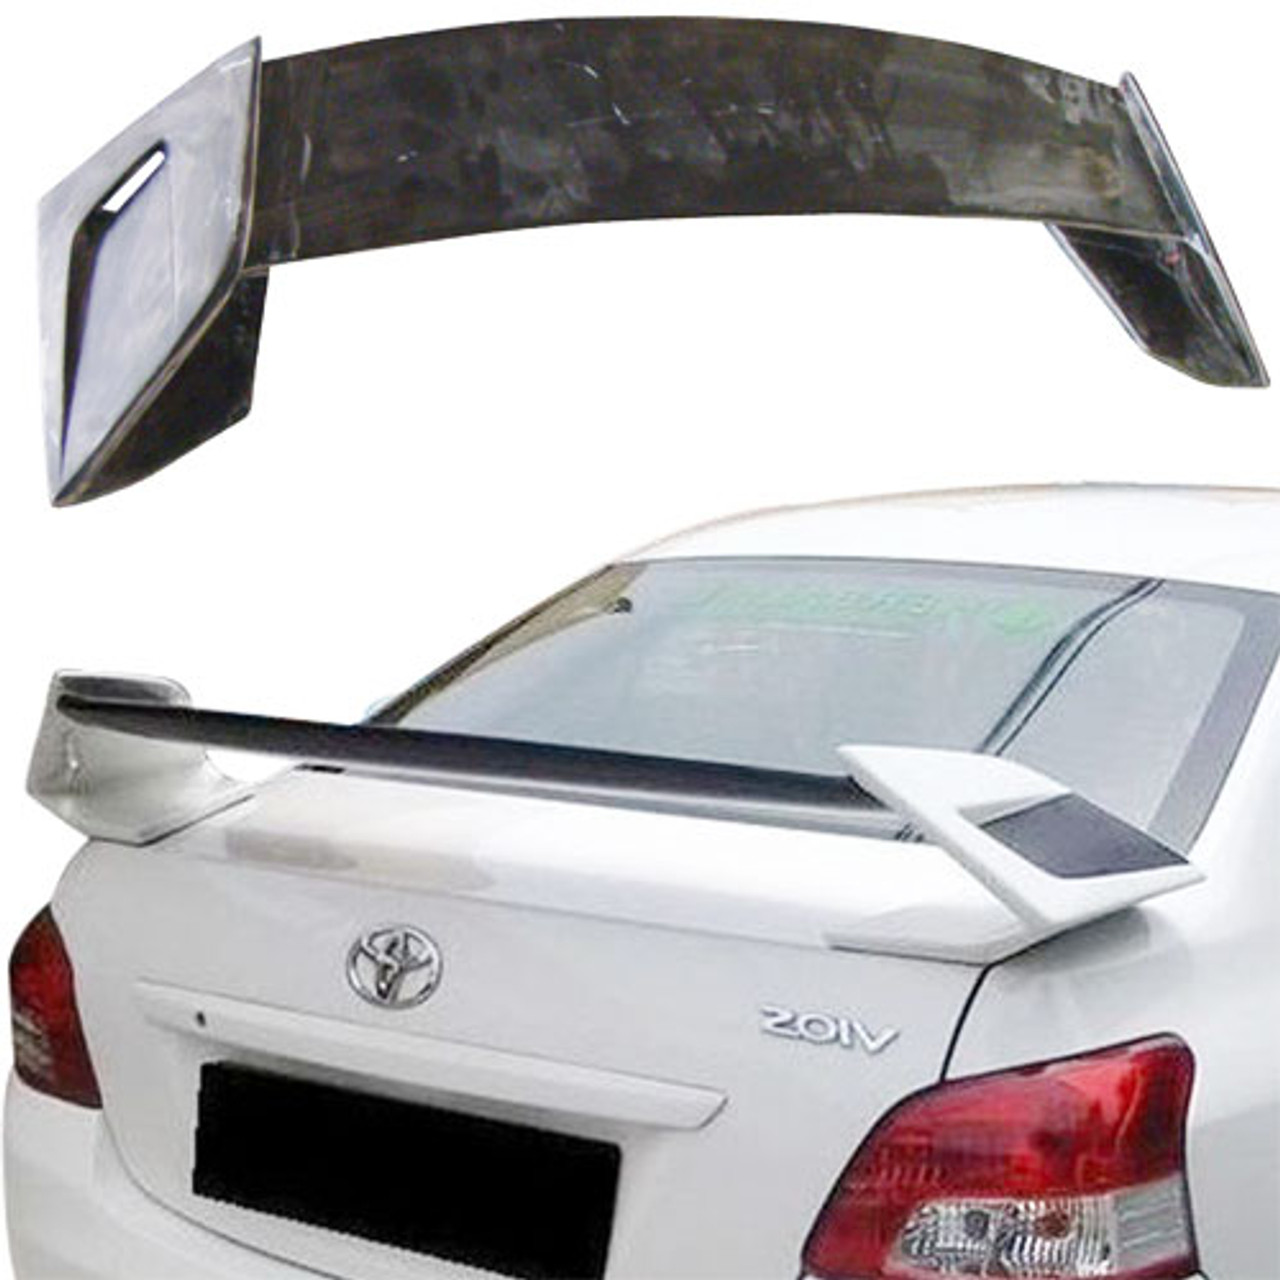 Toyota Yaris : Painted Rear Spoiler Wing fits 2007 - 2011 Models